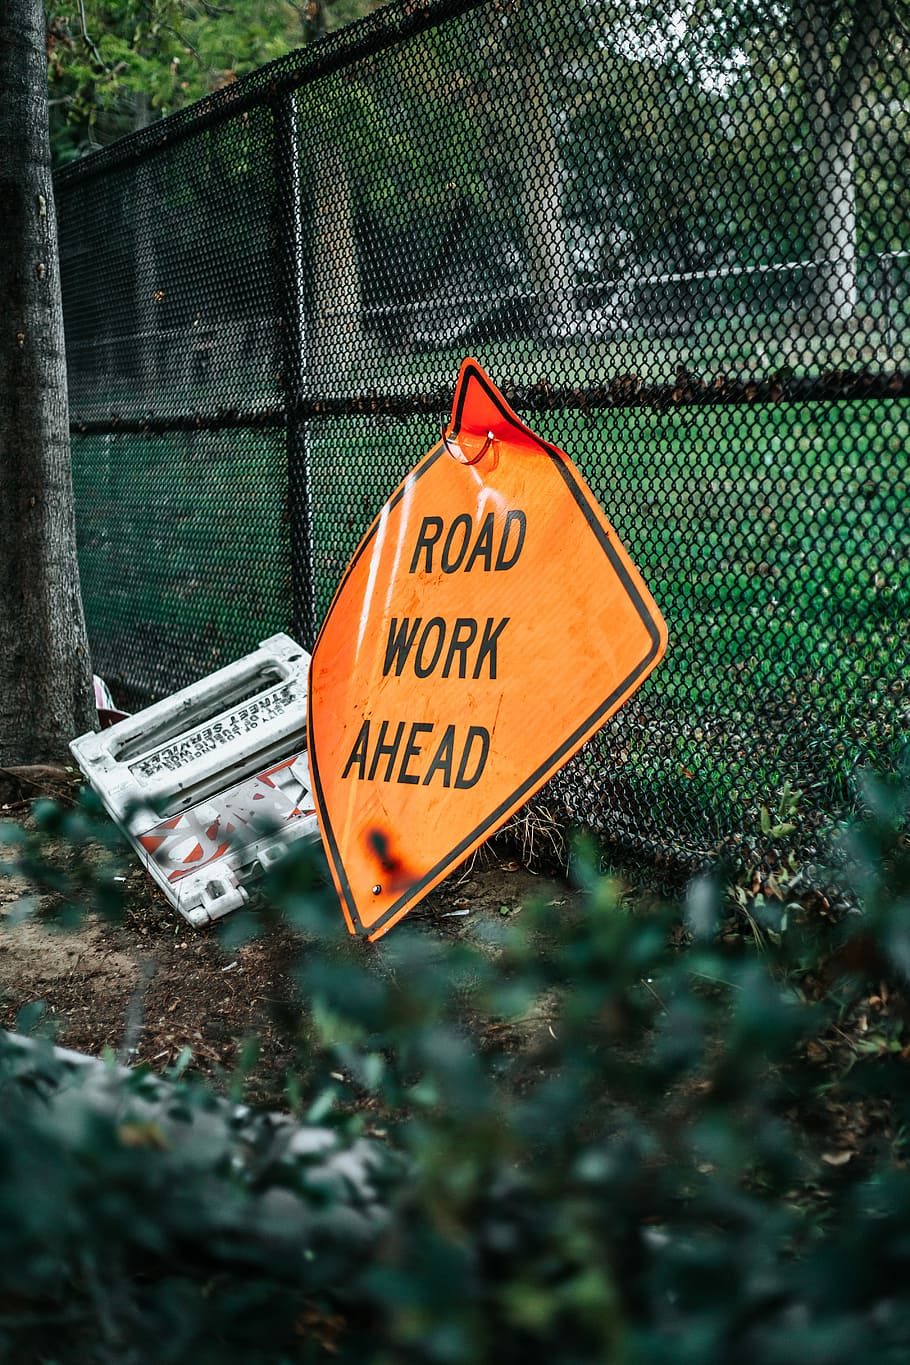 road work ahead signage leaning on chain link fence, road work ahead signage